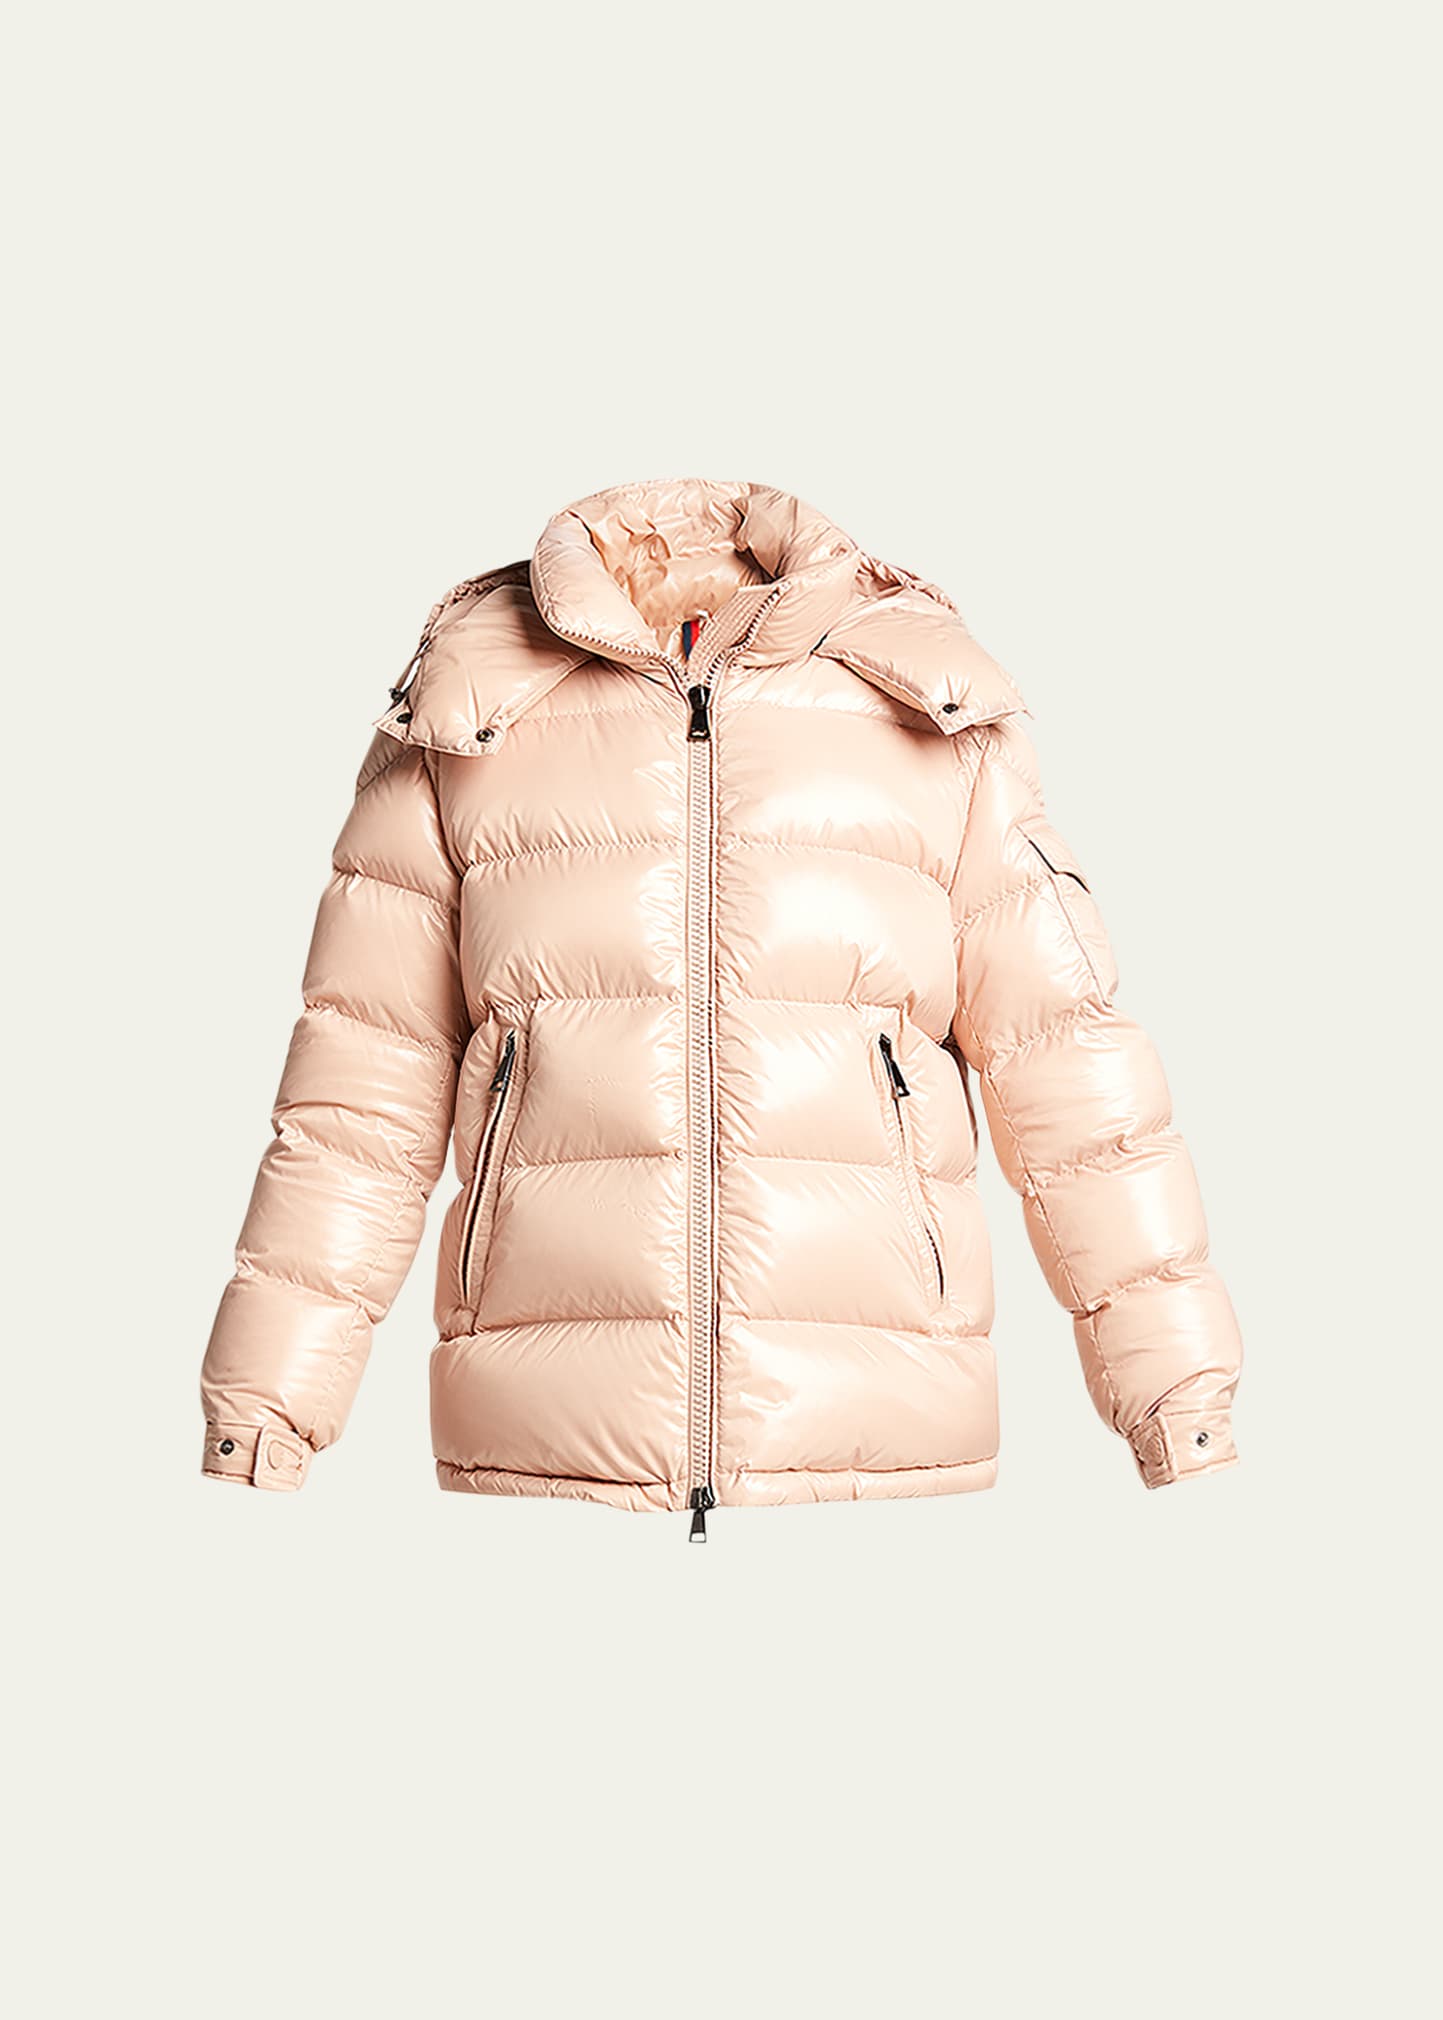 Moncler Maire Shiny Puffer Jacket